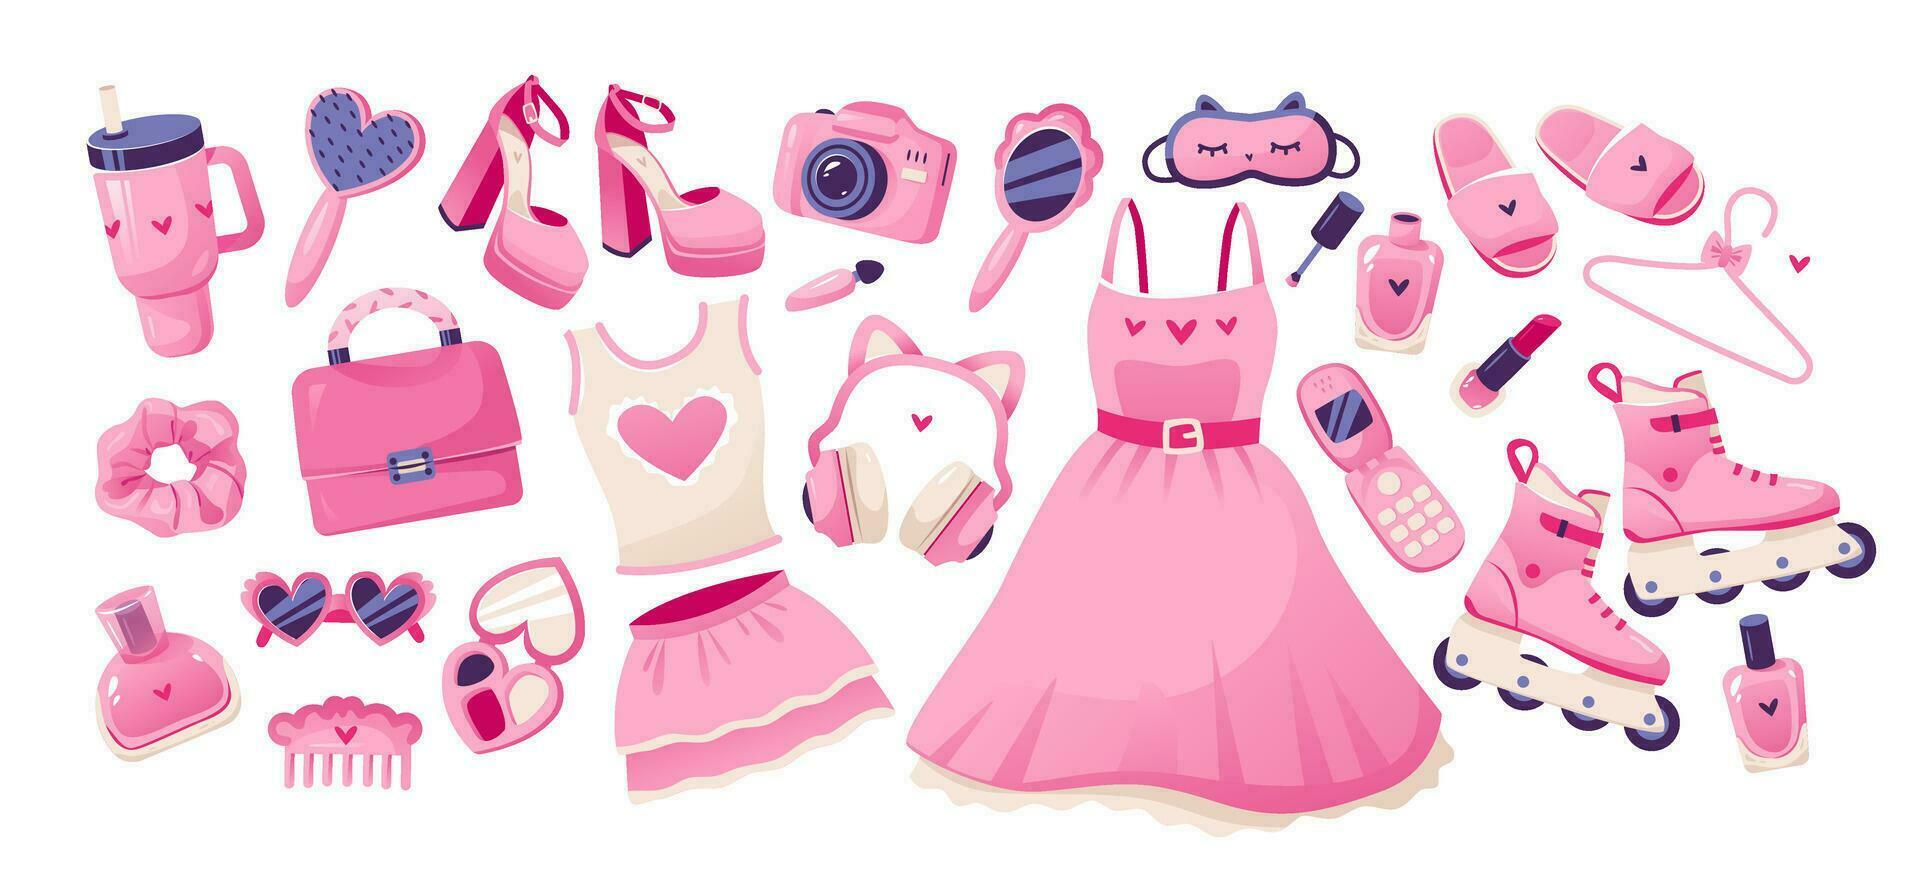 Barbiecore set with cute pink accessories and clothes. Glamorous things dolls. Vector illustration